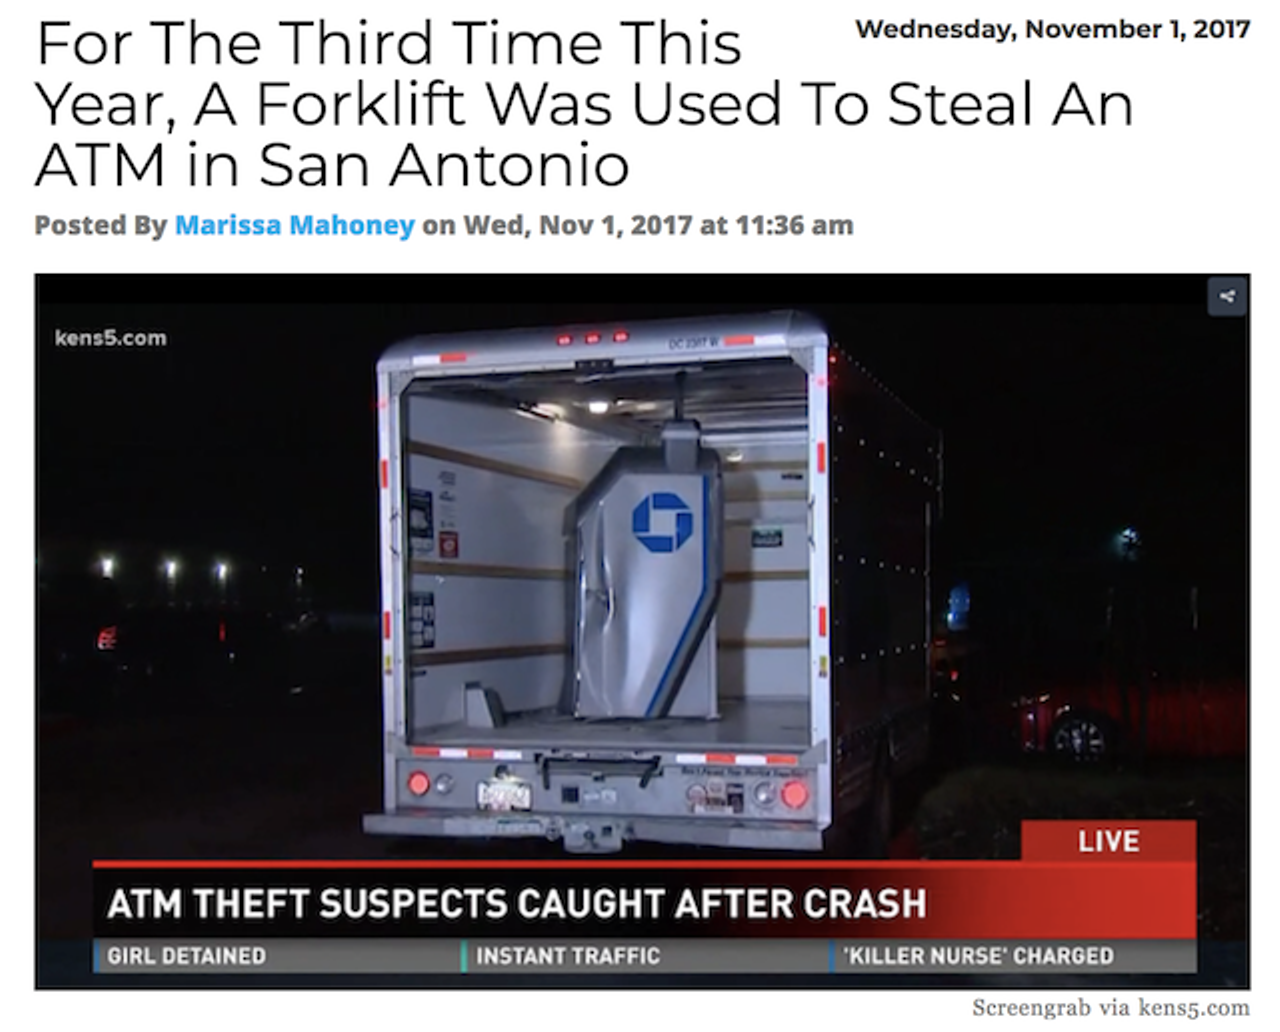 For the third time this year, suspects used a forklift to steal an ATM, thus the term "forklift thievery" was born. Read more.